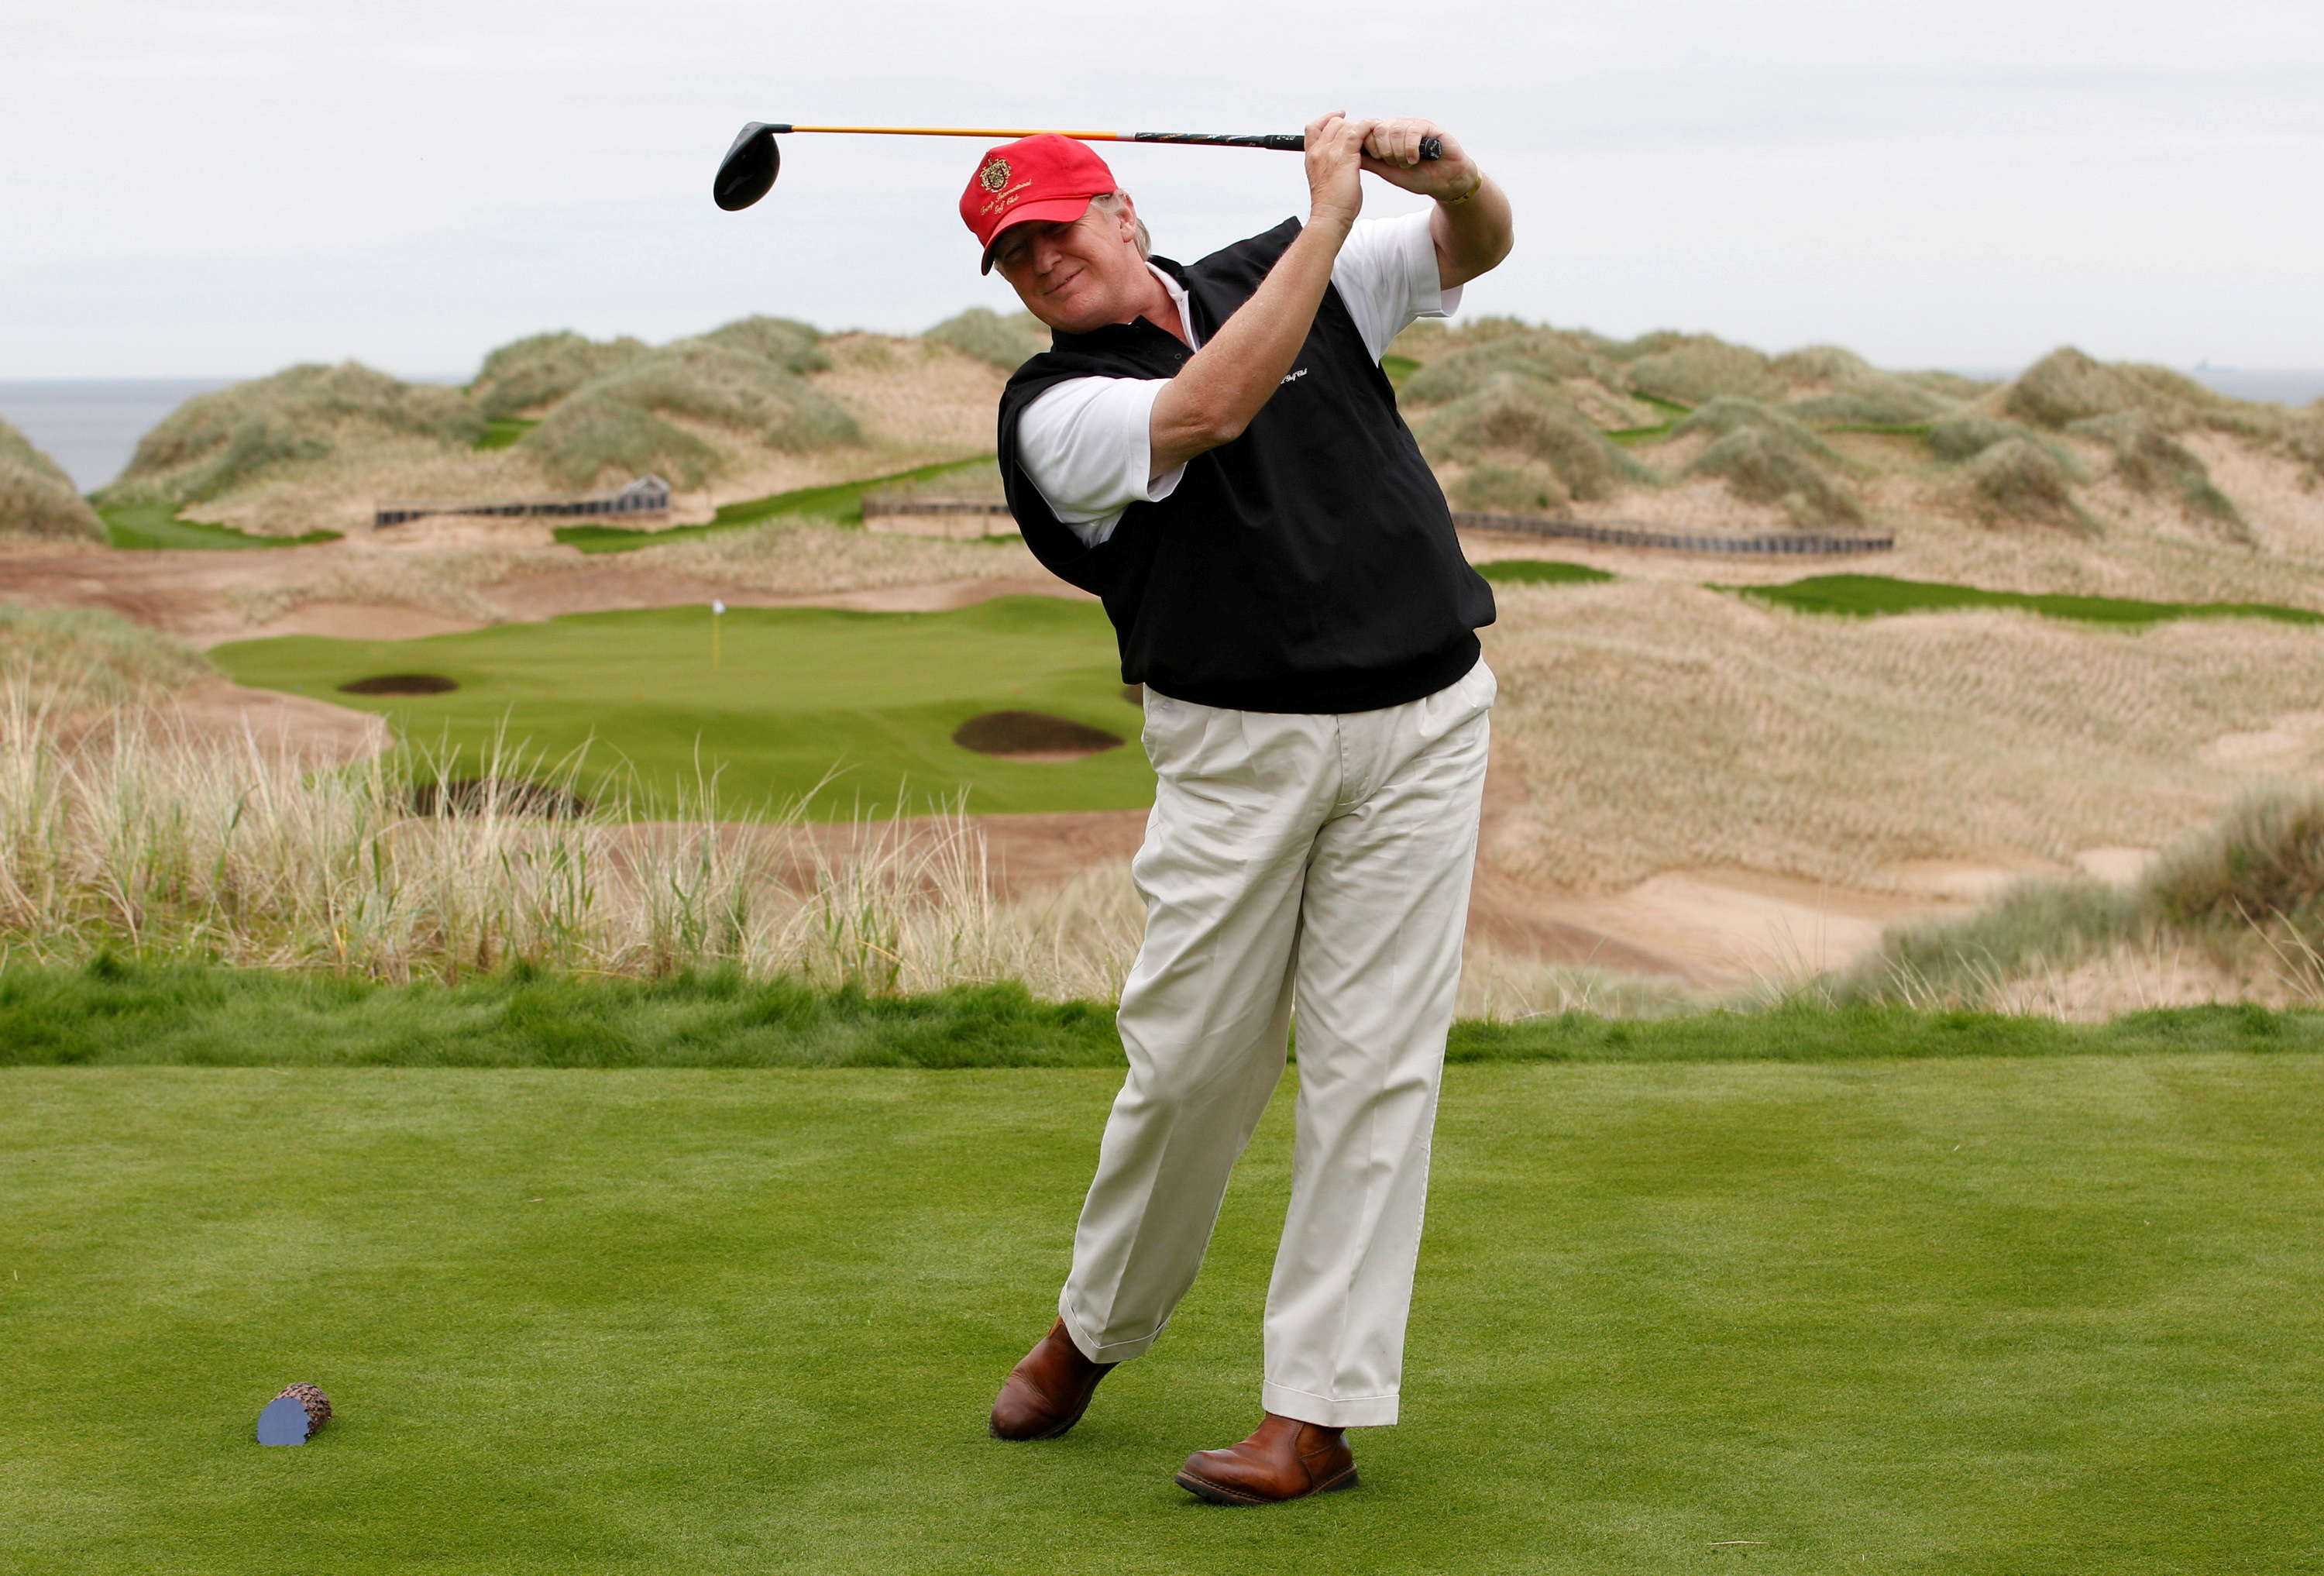 U.S. property magnate Donald Trump practices his swing at the 13th tee of his new Trump International Golf Links course near Aberdeen